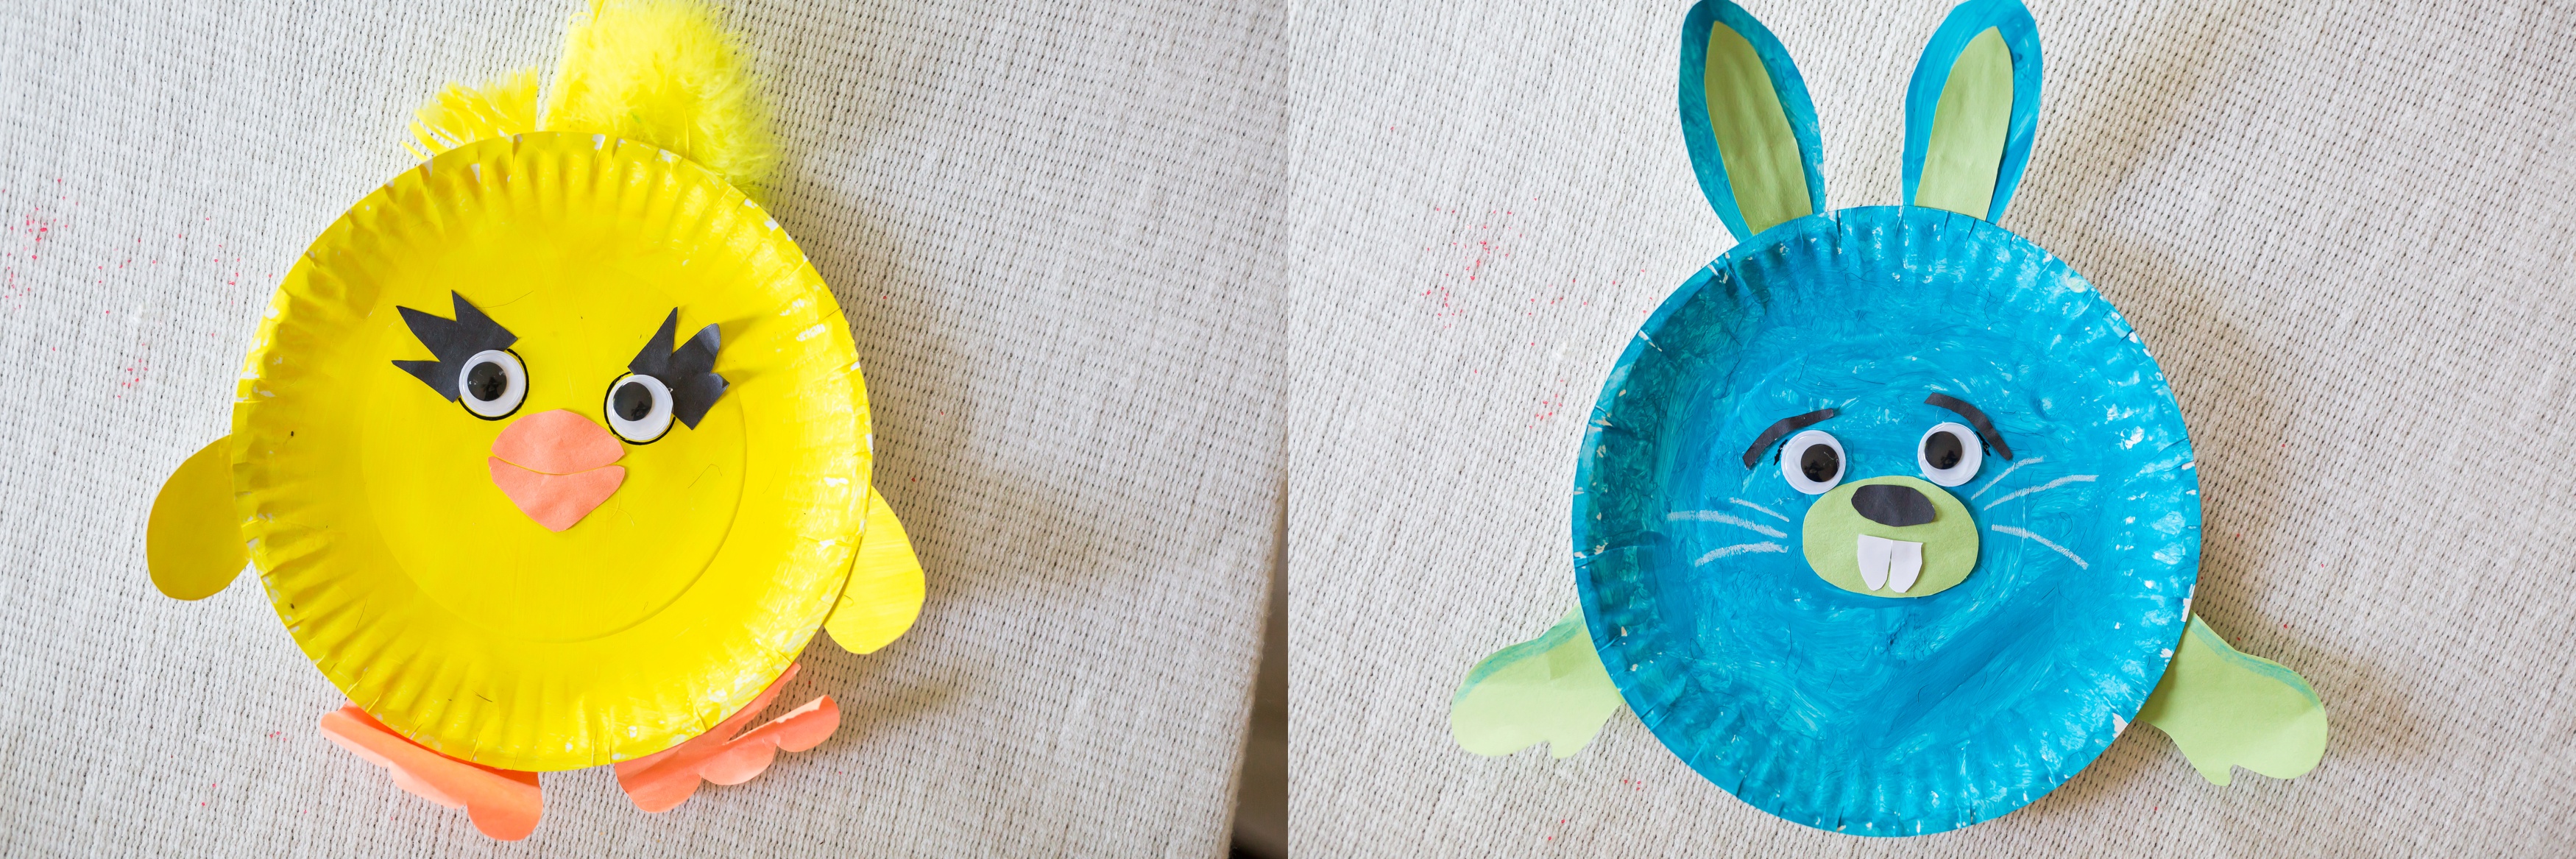 DIY Ducky and Bunny Paper Plate Craft Toy Story 4, Toy Story 4 Craft, Magic for Miles